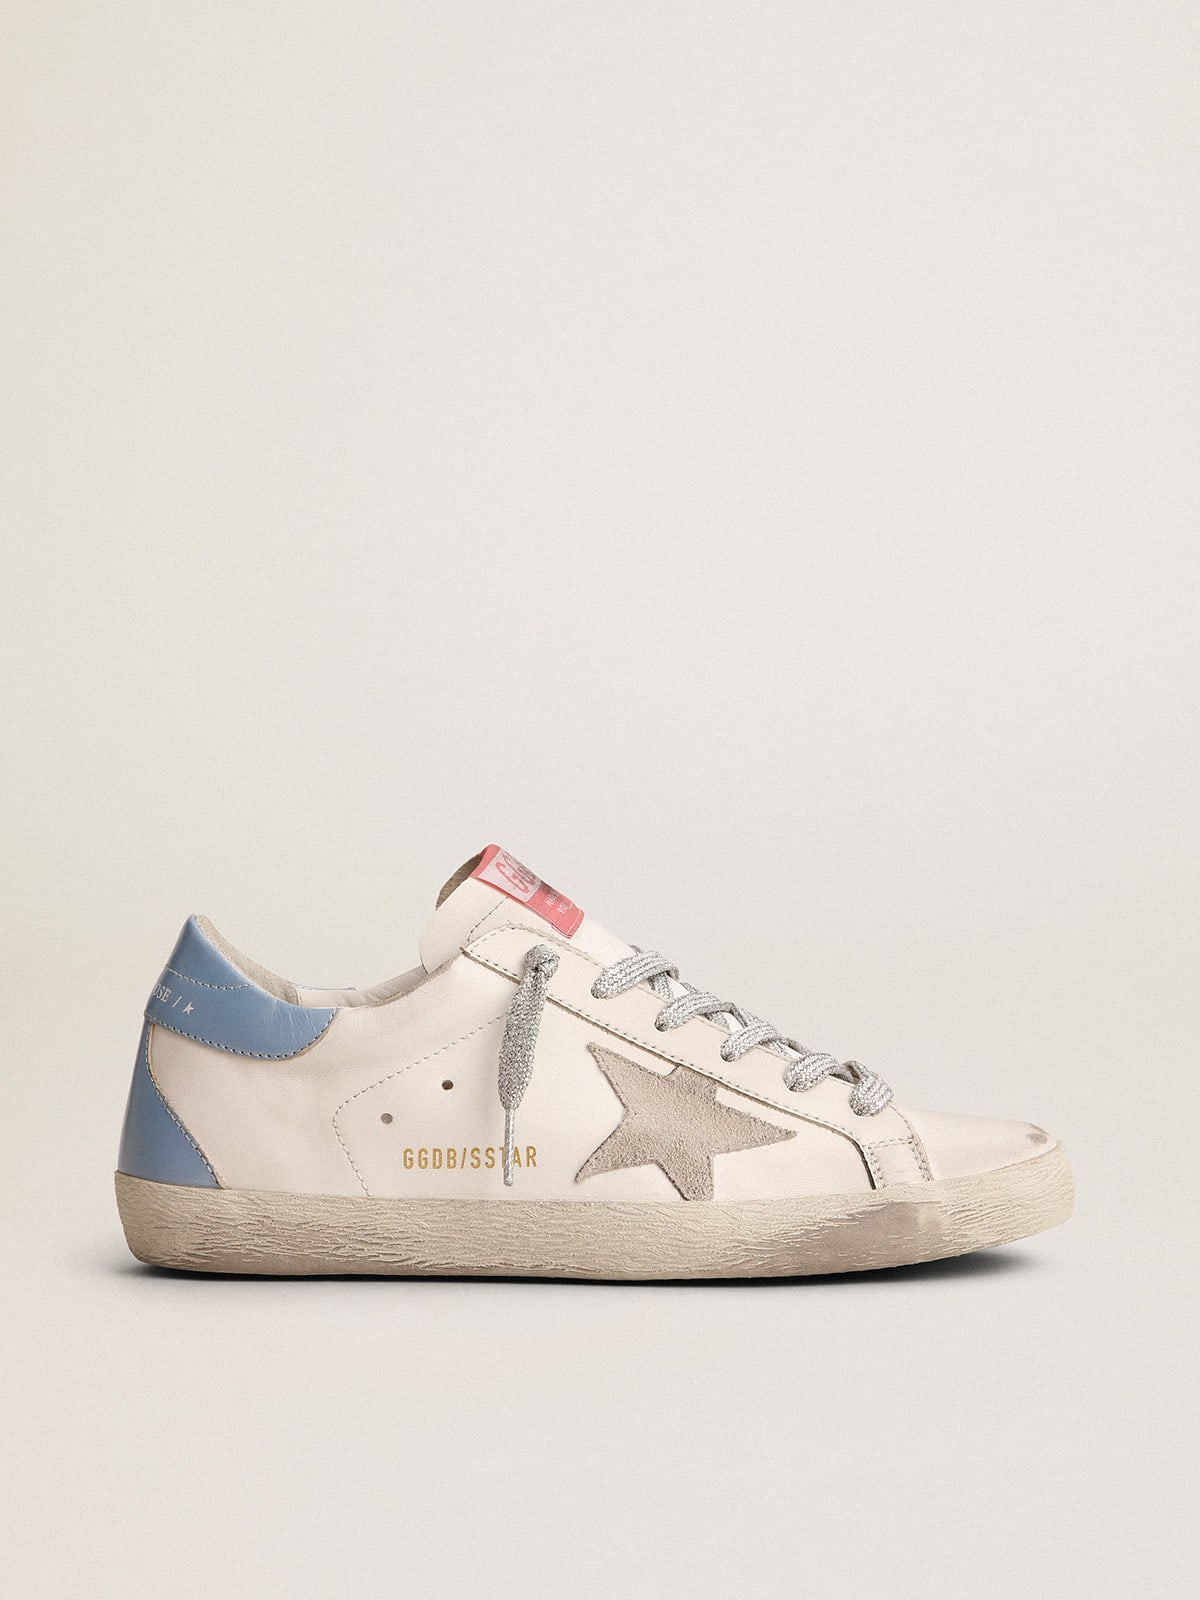 Super-Star sneakers with light blue heel tab and ice-gray star